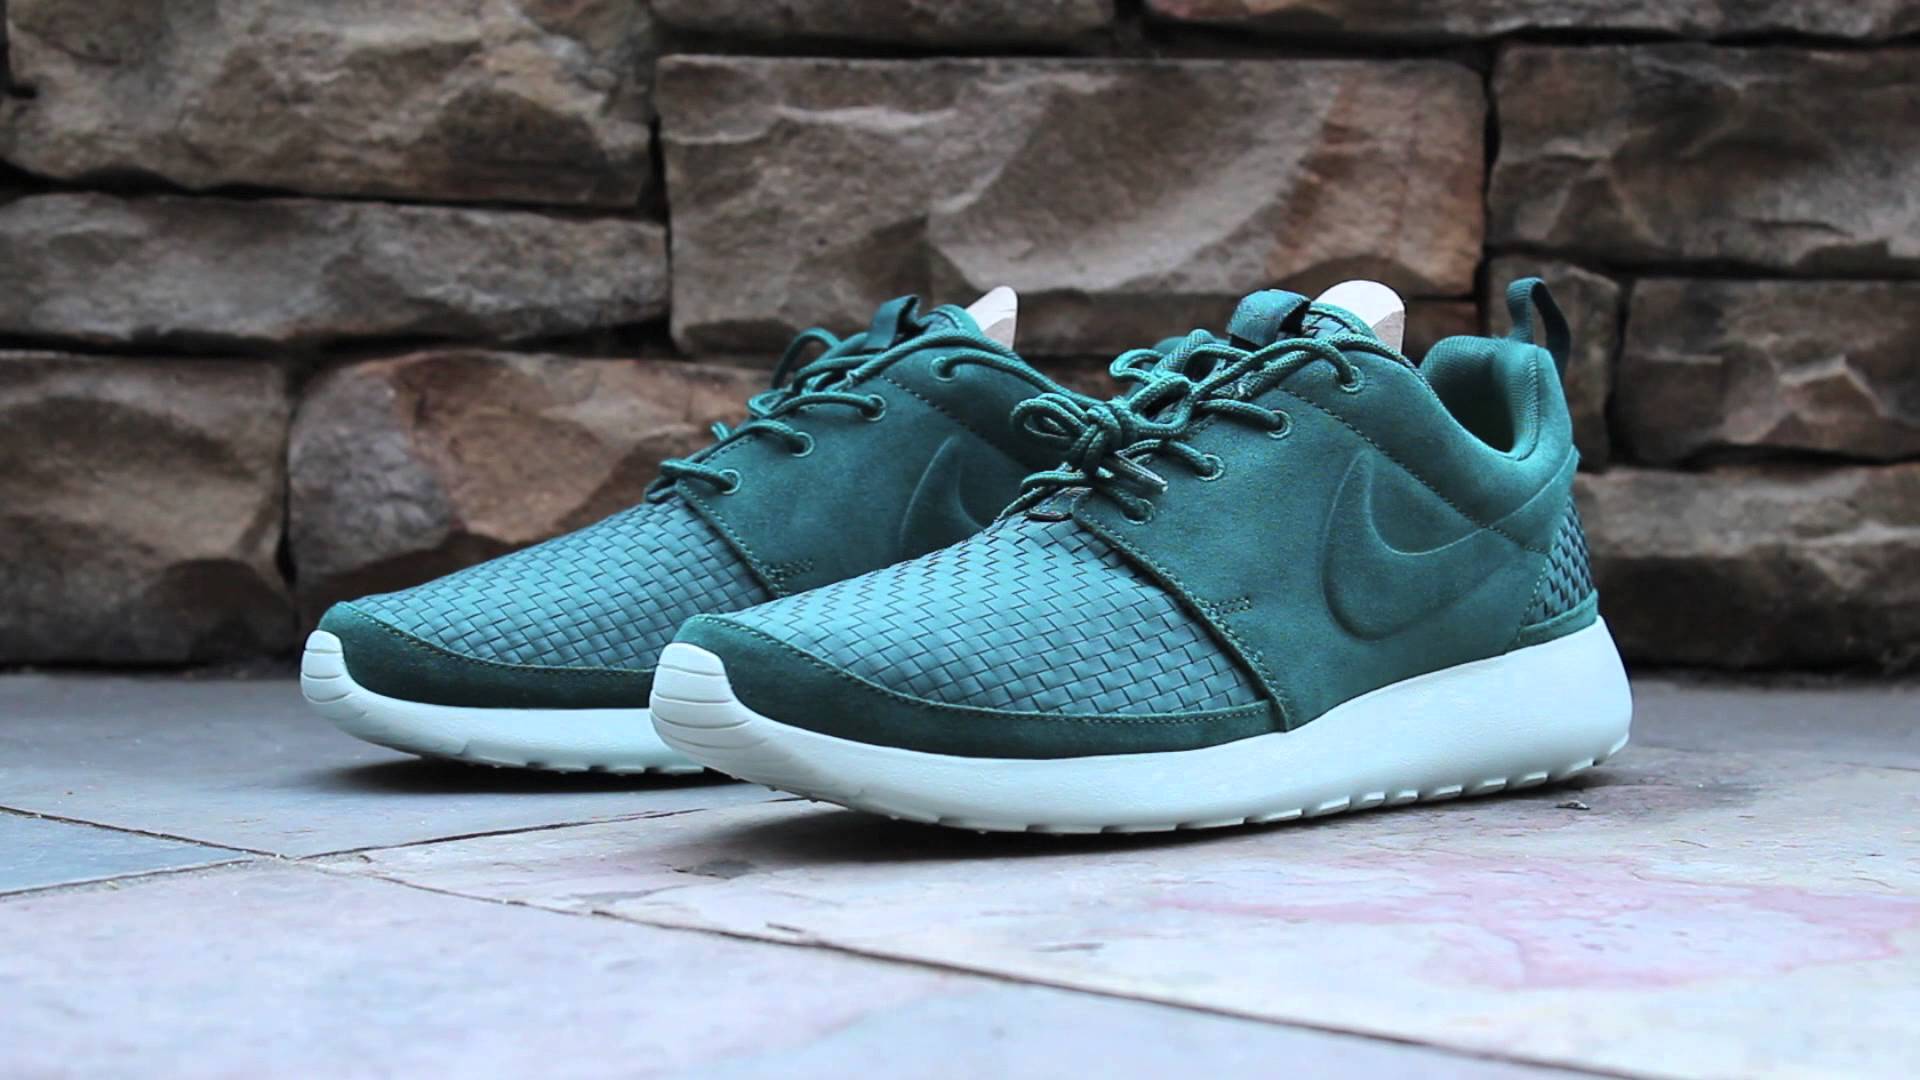 Quick Look: Roshe Run Woven Atomic Teal